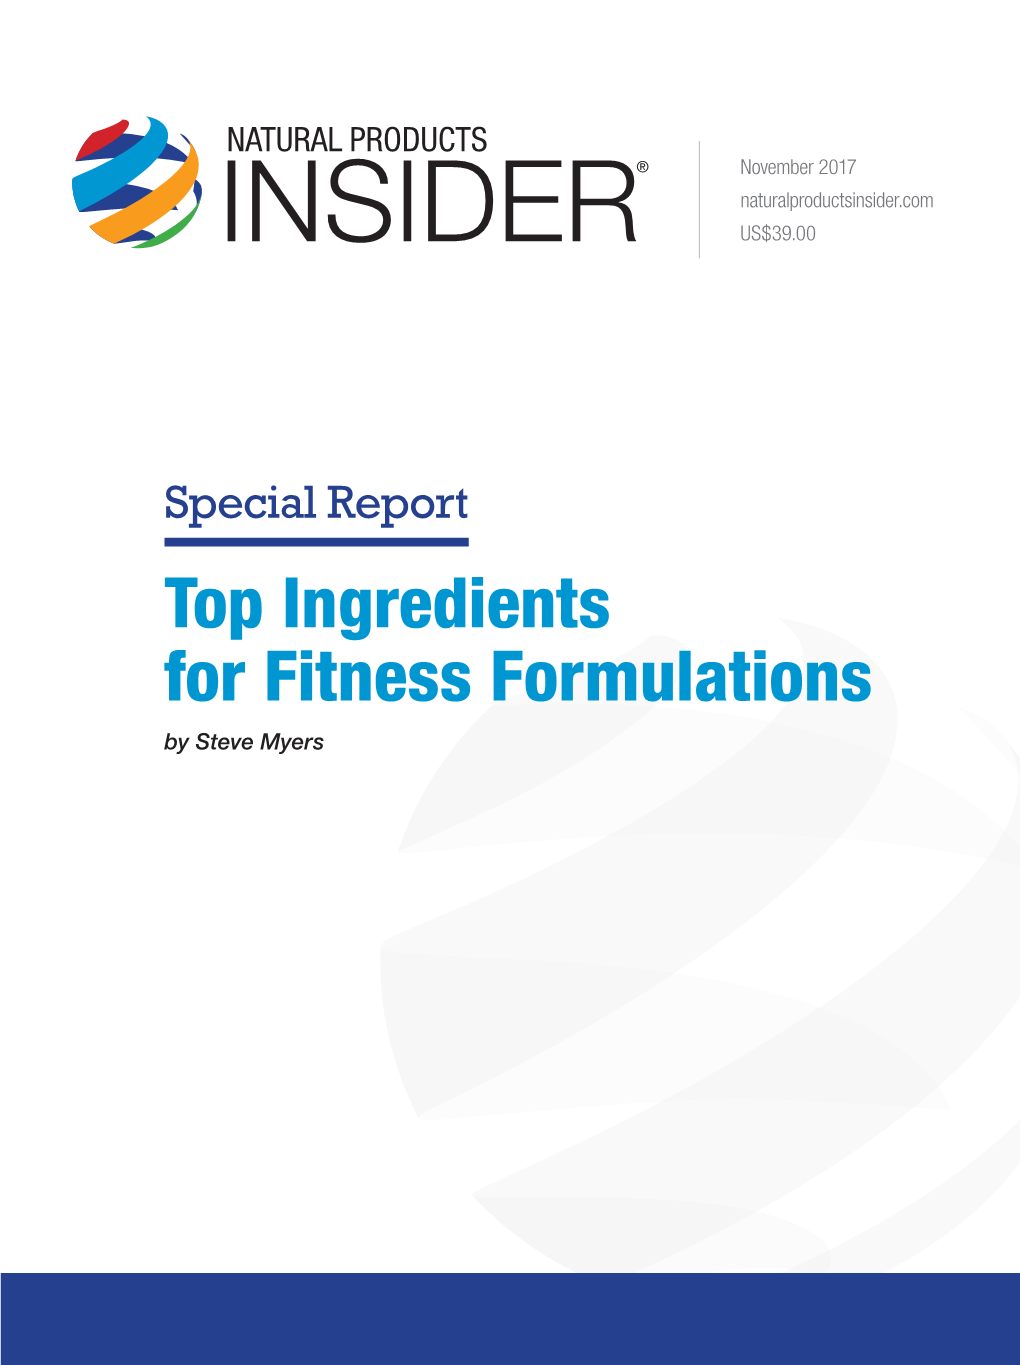 Top Ingredients for Fitness Formulations by Steve Myers Top Ingredients for Fitness Formulations by Steve Myers